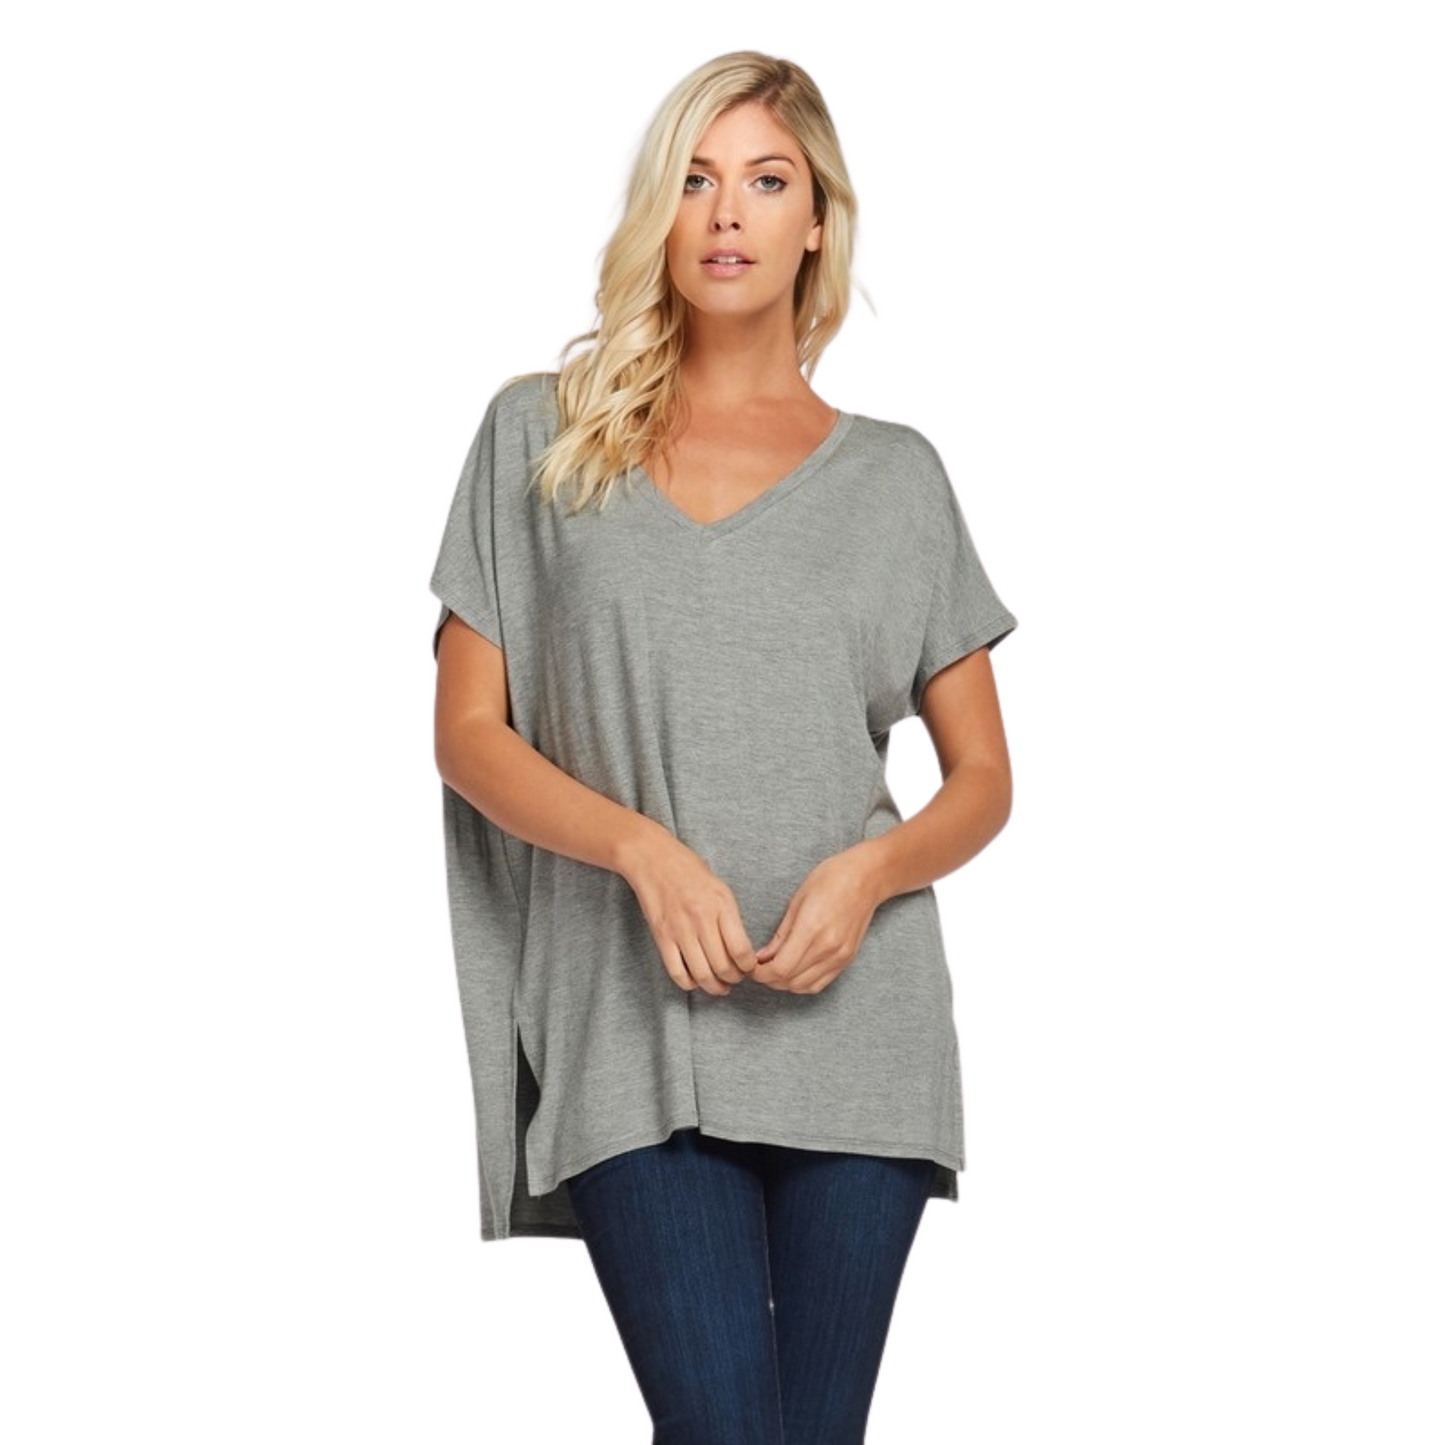 This comfortable and classic tee features a classic V-neck cut and is designed with lightweight fabric and breathability in mind. The heathered grey hue makes this tee perfect for your casual weekends. The perfect way to stay relaxed, cool, and stylish all at once.